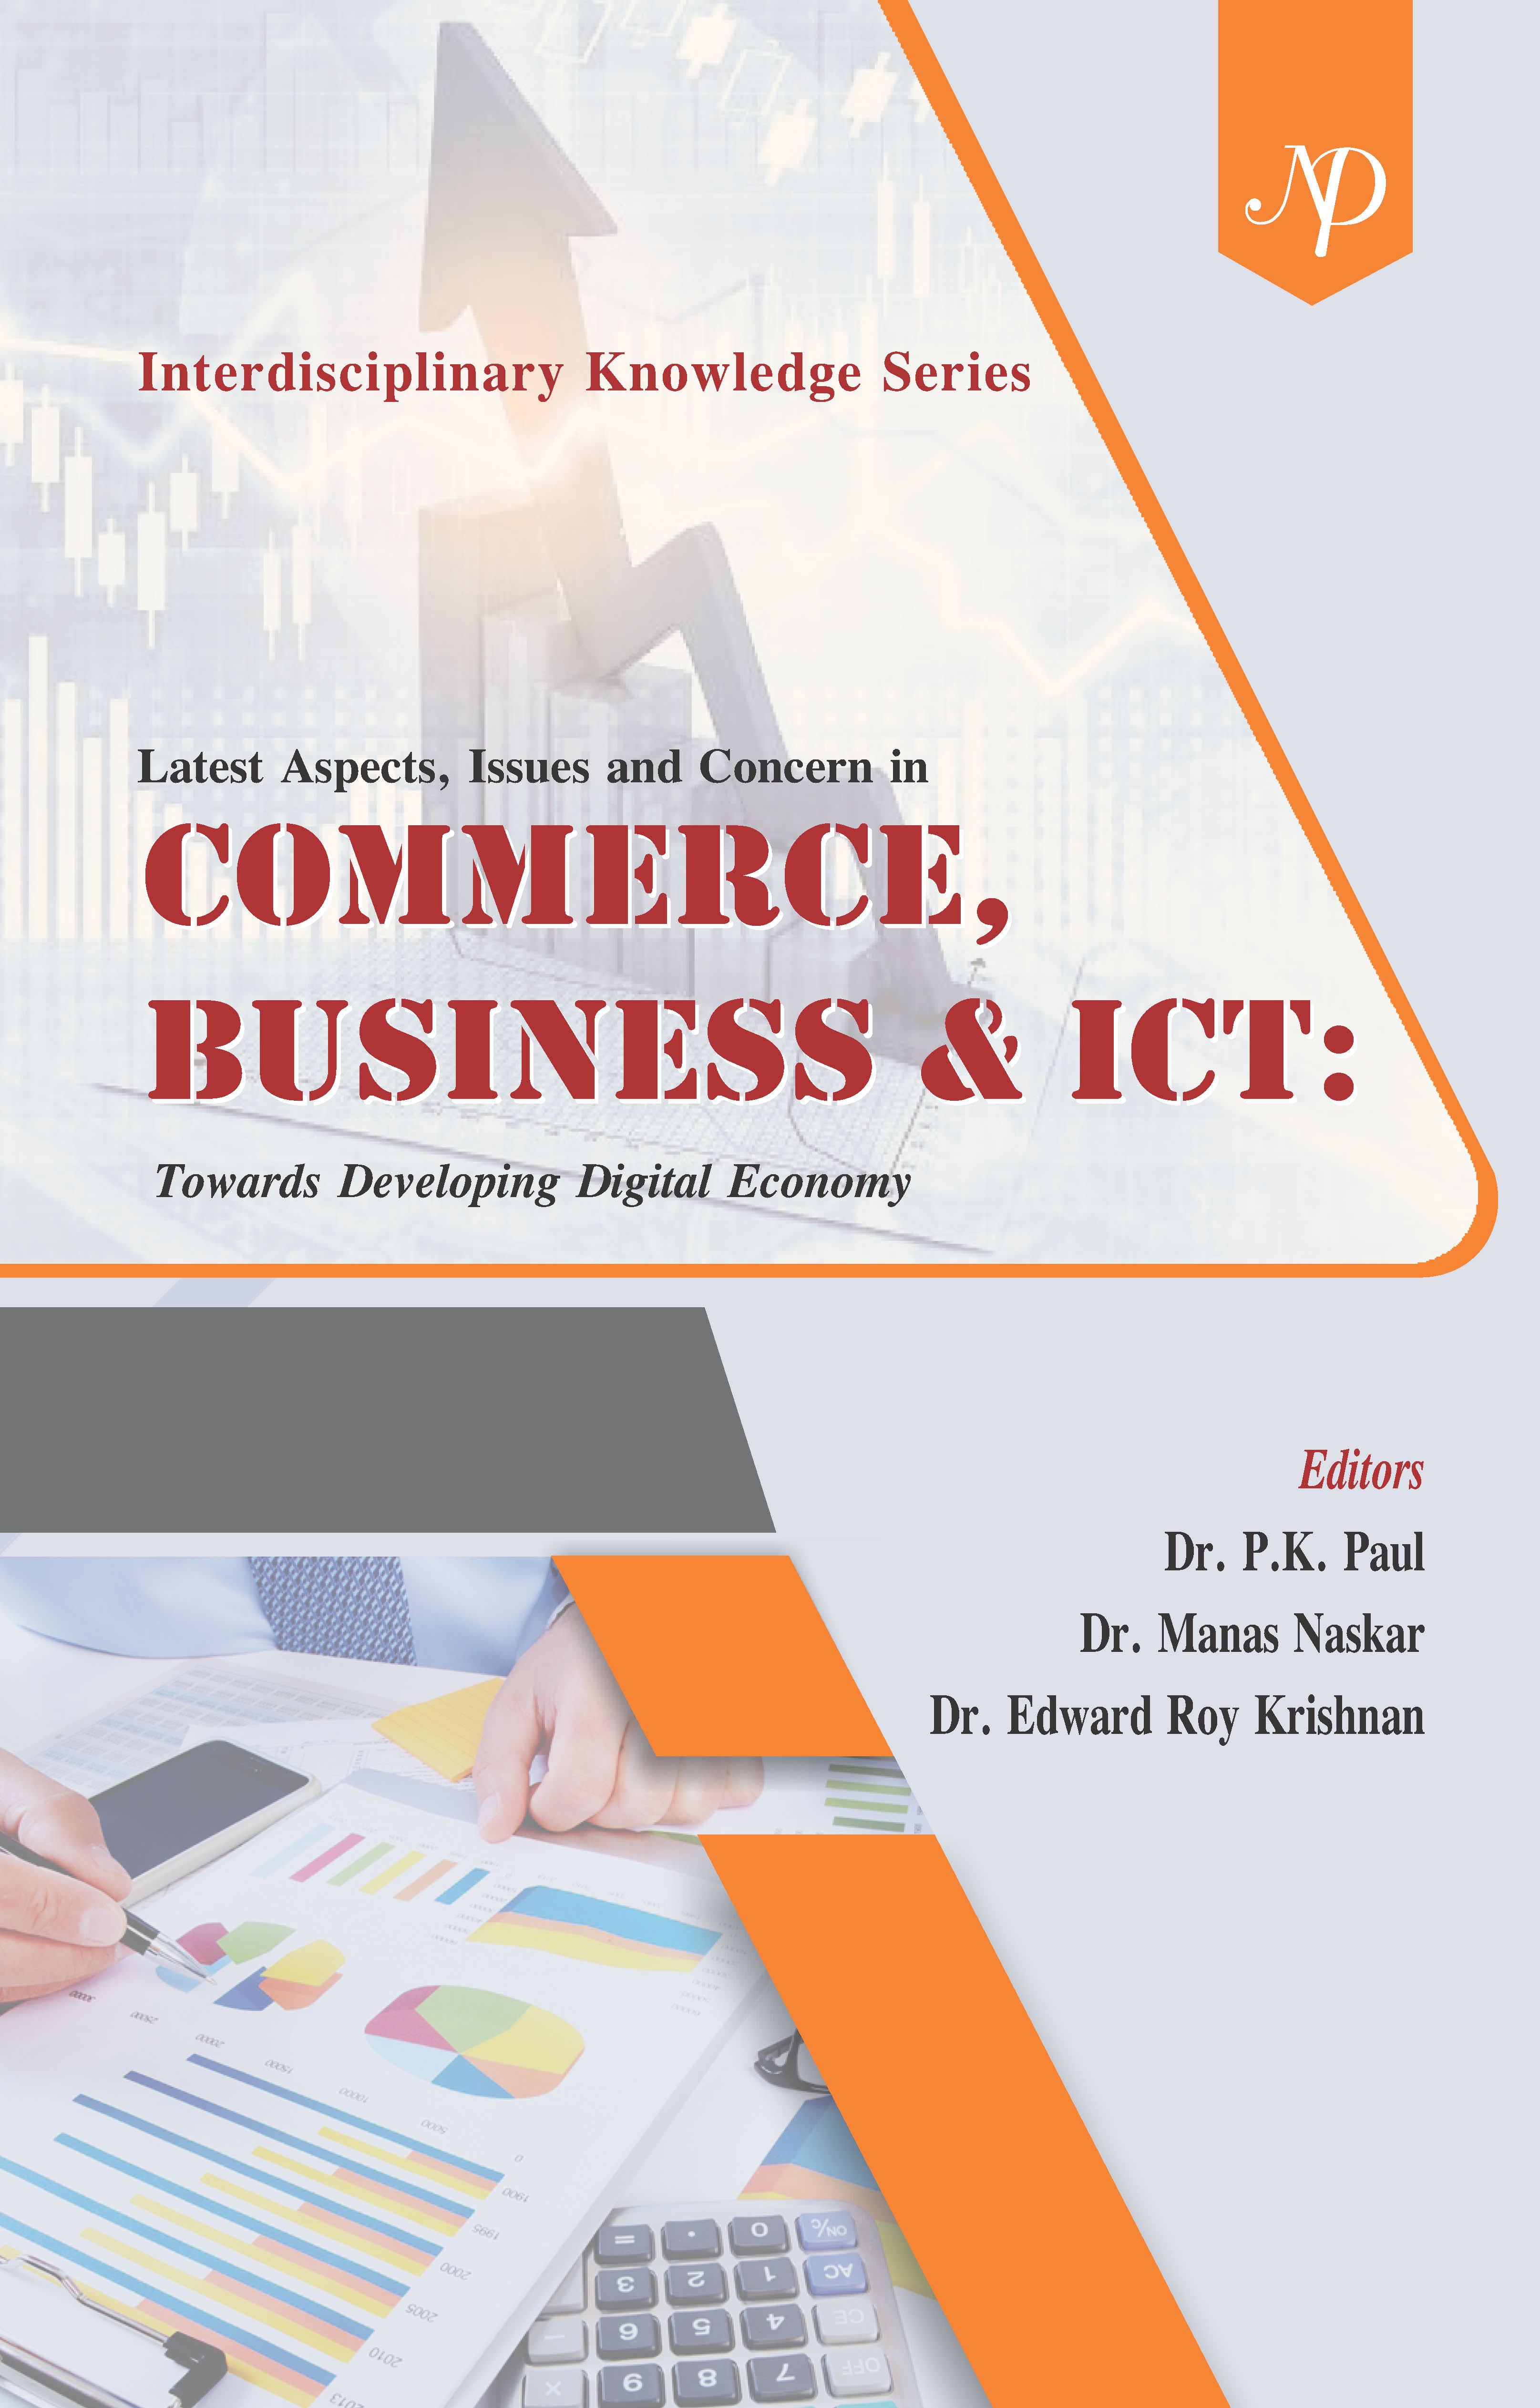 Latest Aspects, Issues and Concern in Commerce, Business and ICT (1).jpg